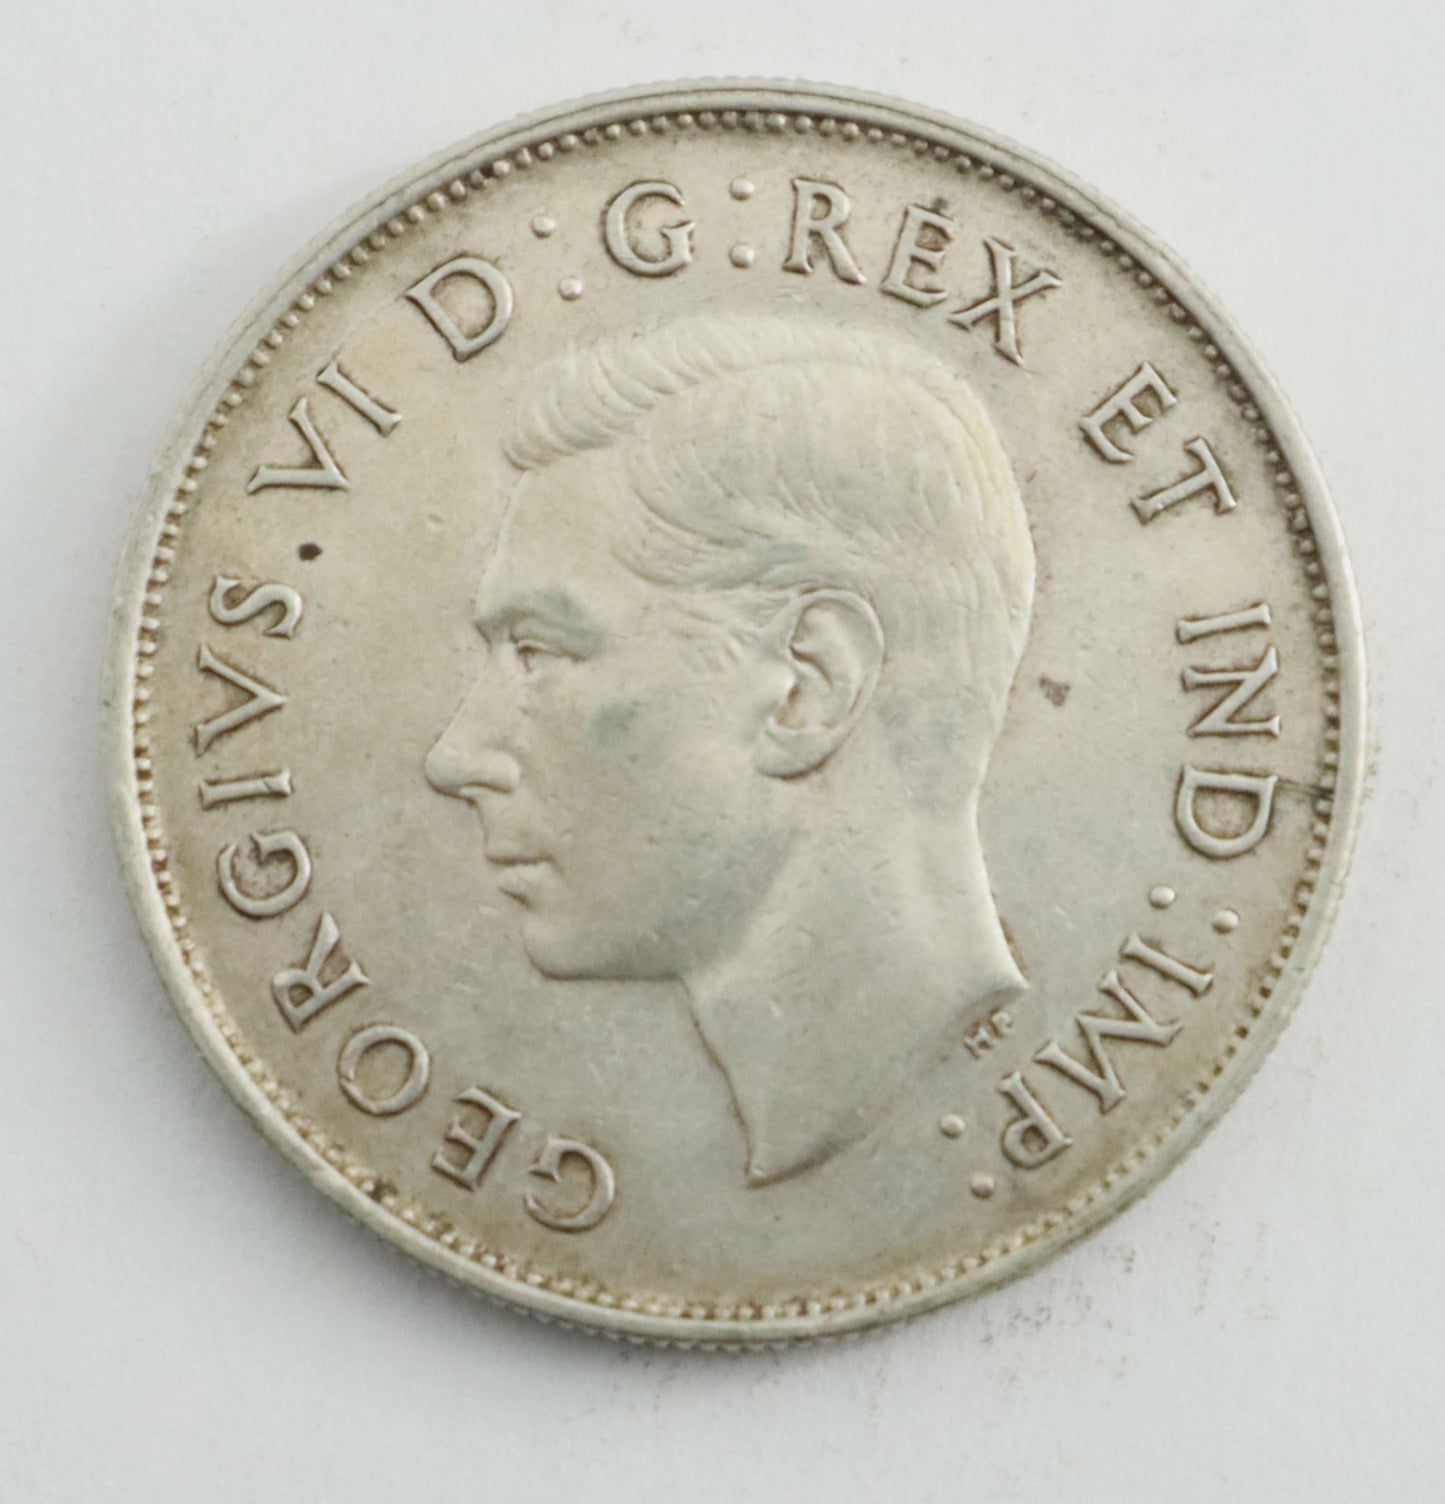 1943 Canadian Silver 50 Cent Coin Narrow Date ND Cat #C0125